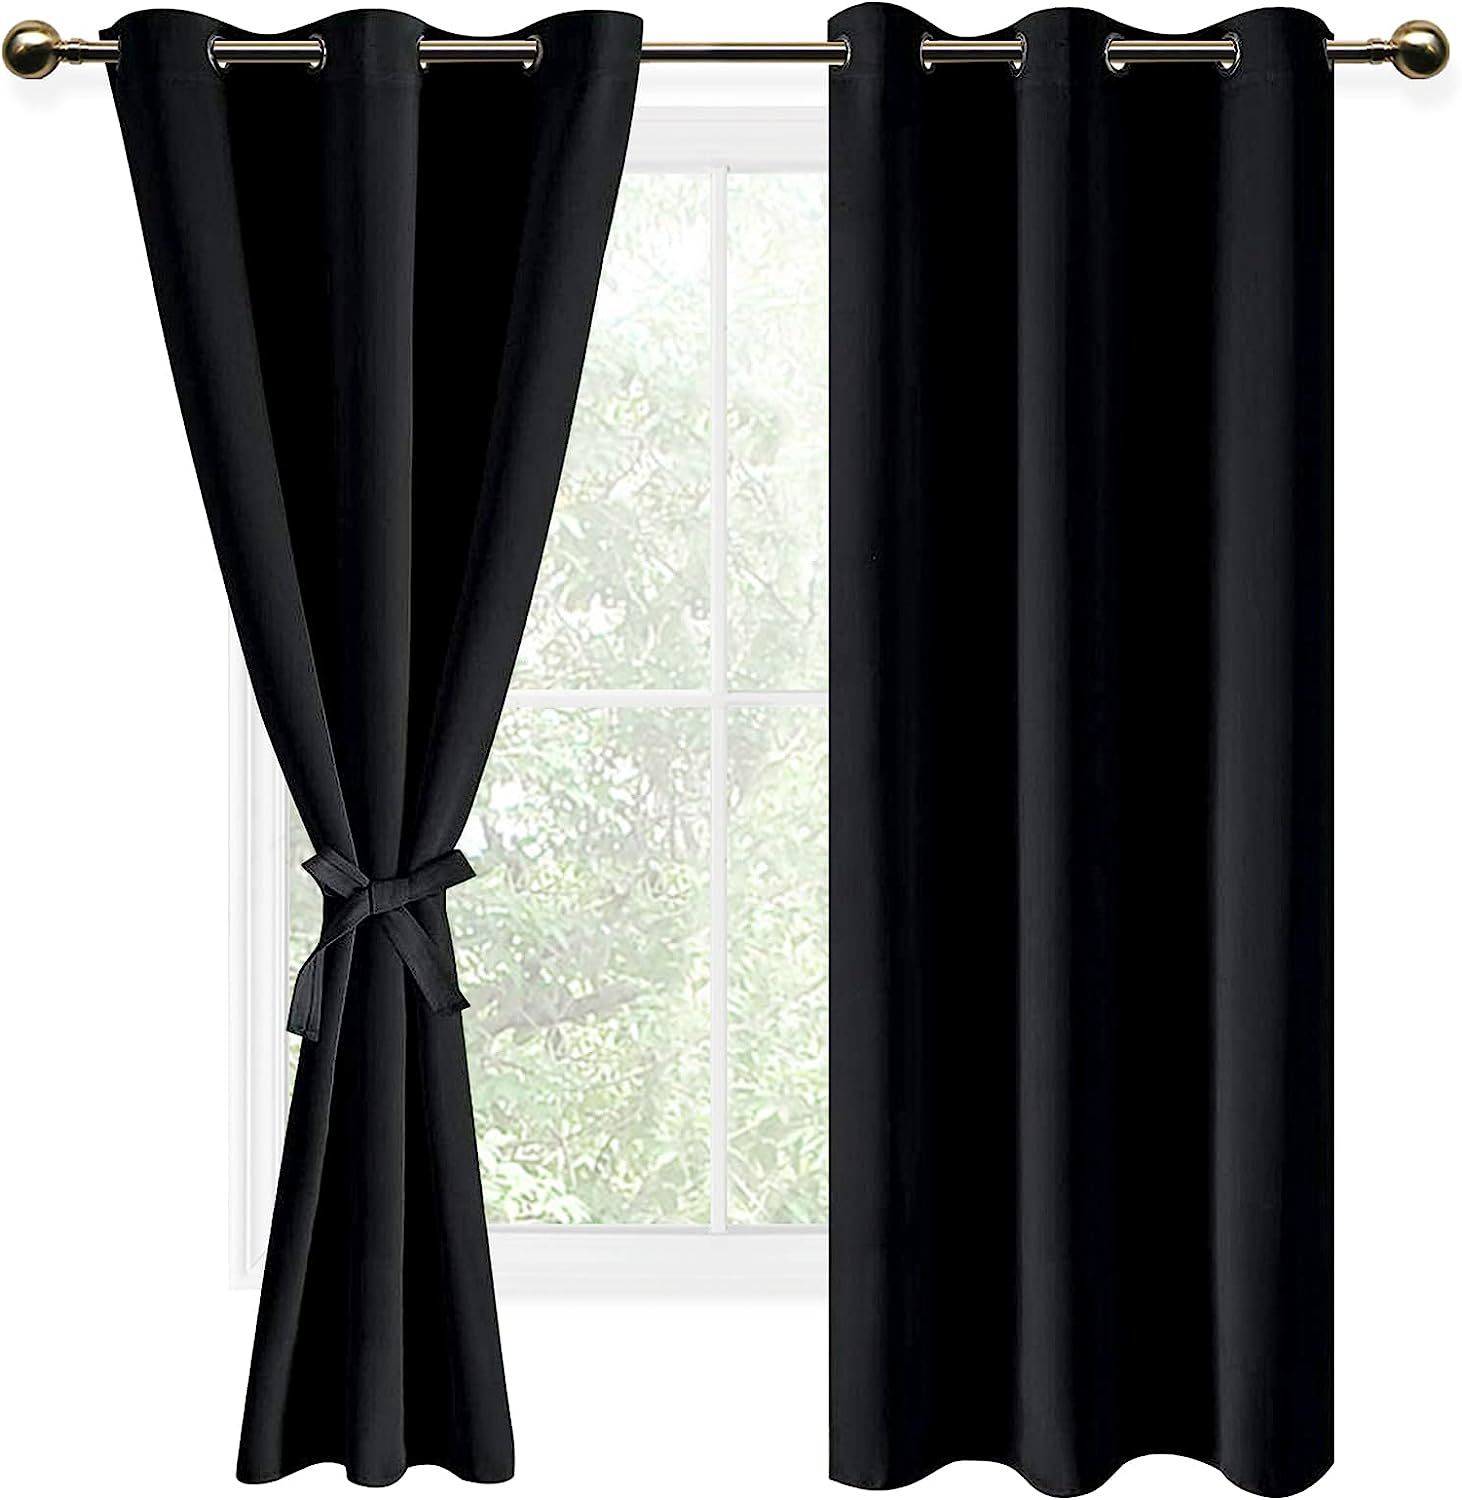 Dwcn Black Blackout Curtains For Bedroom Sewn With Tiebacks - Thermal Insulated - $31.96